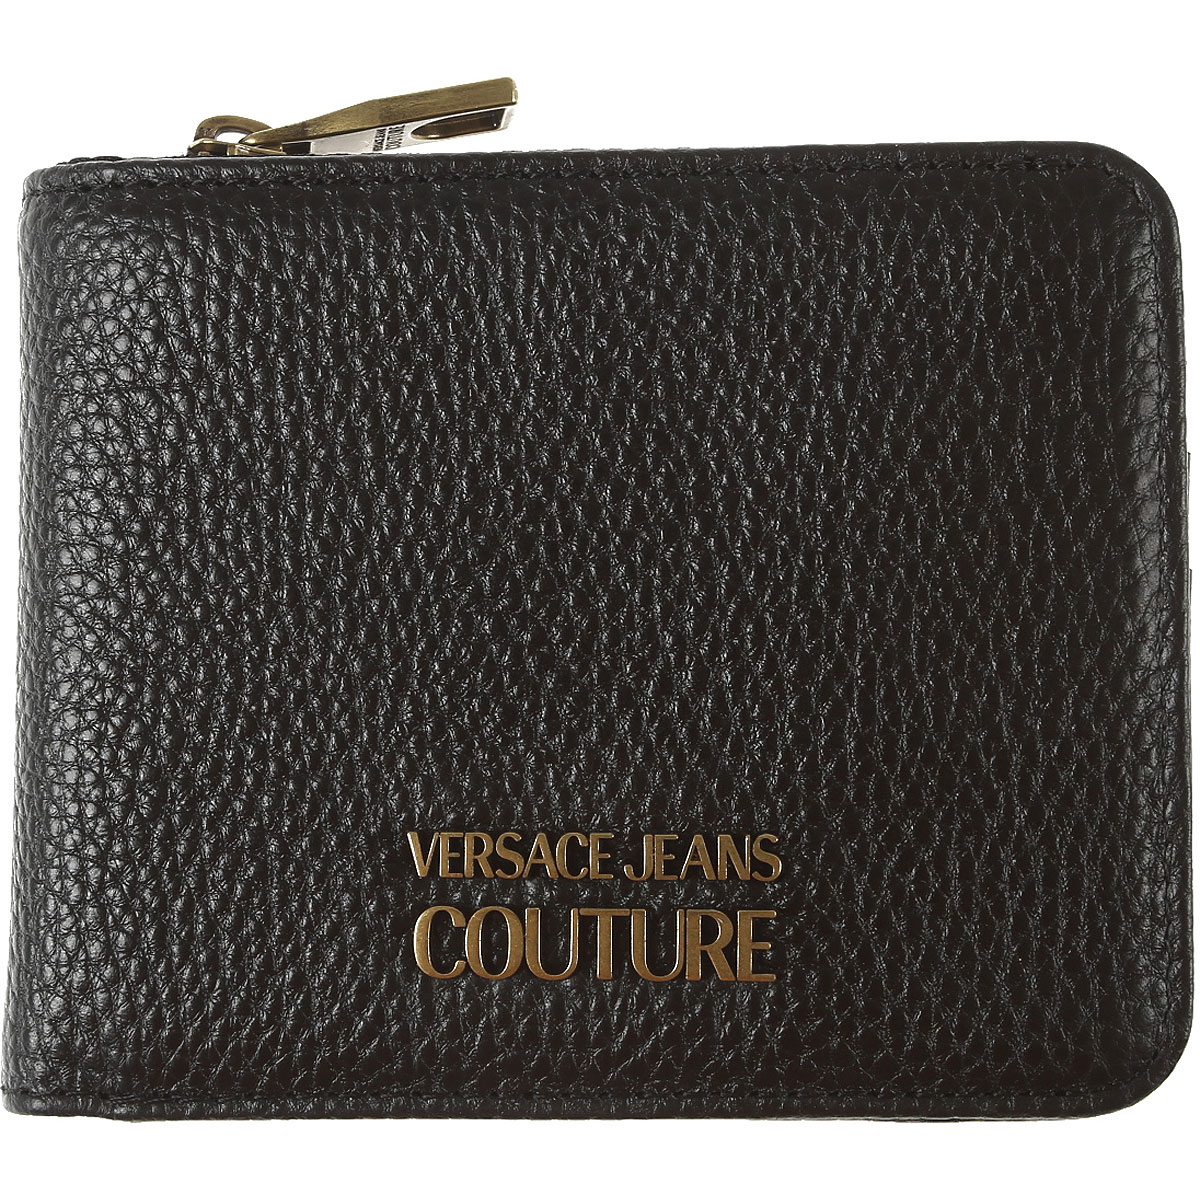 Mens Wallets Versace Jeans Couture , Style code: 73ya5px4-zp114-899